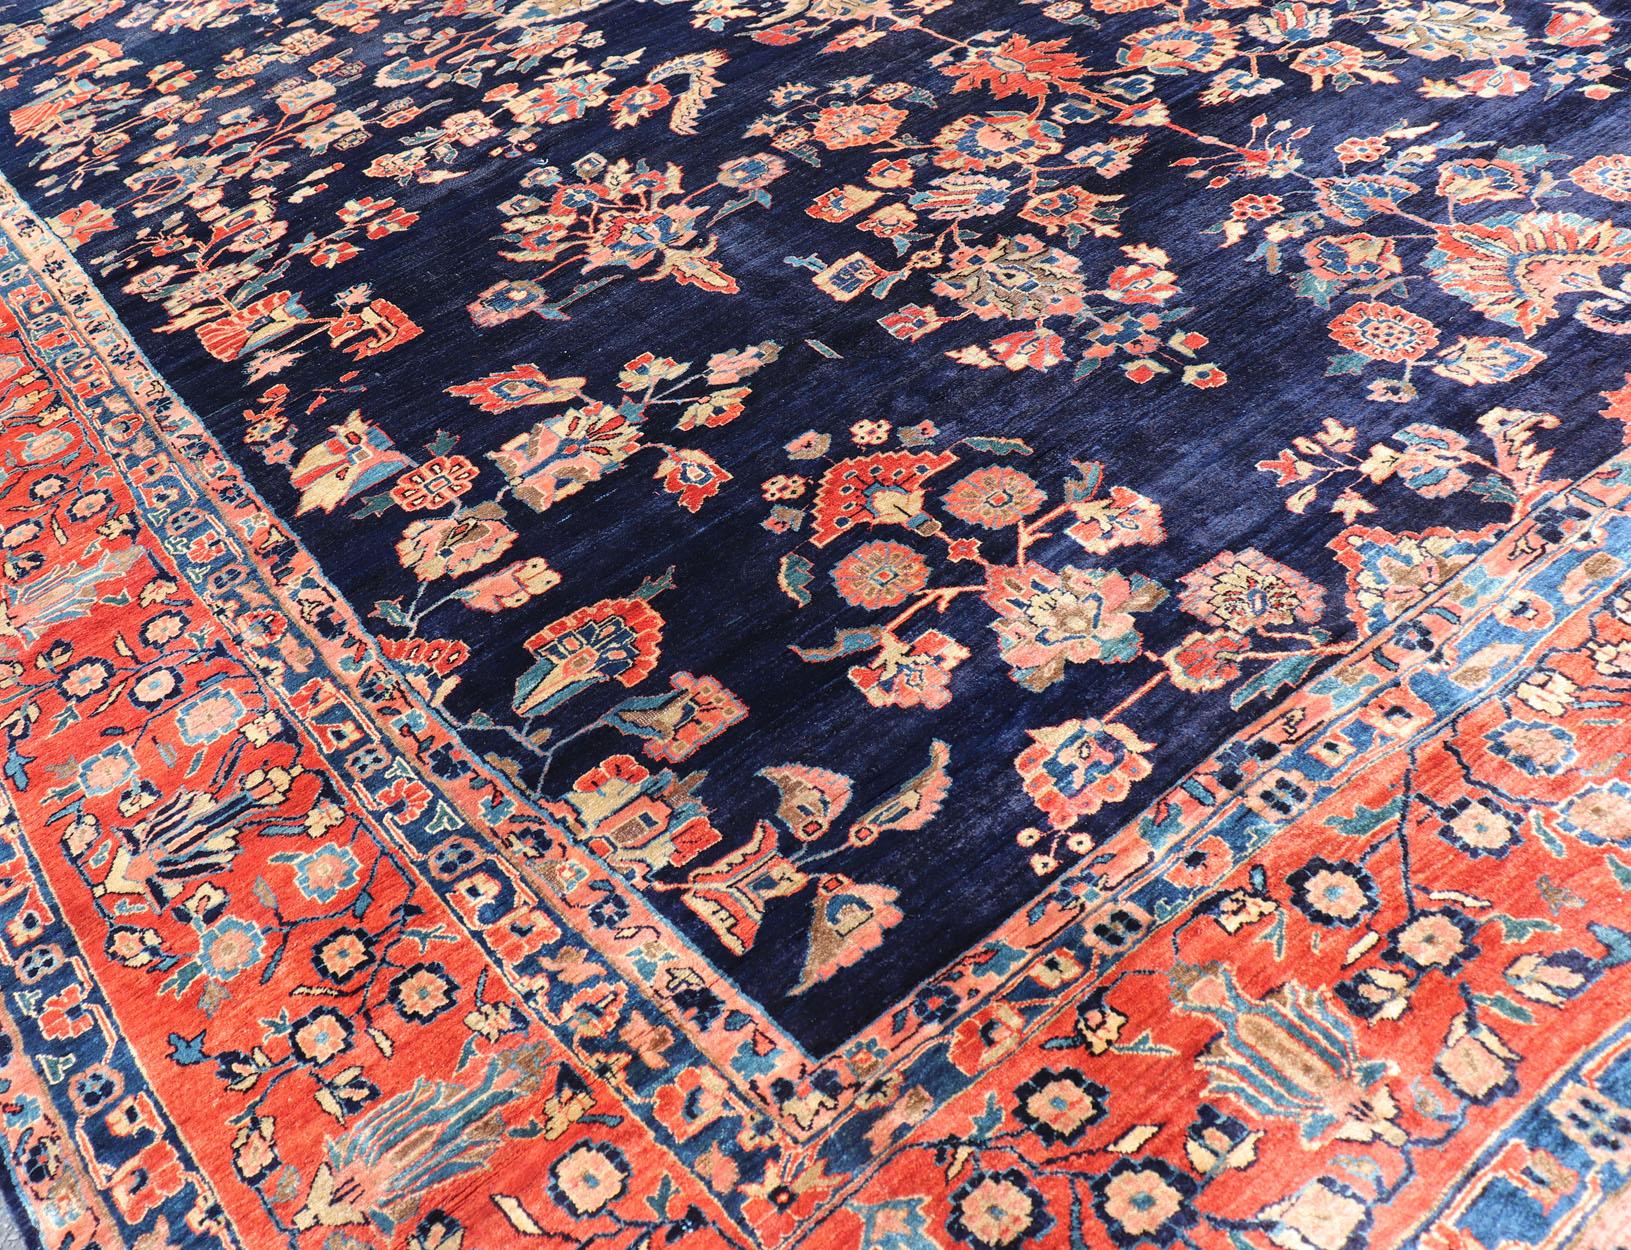 Antique Large Sarouk Faraghan Rug with Floral Pattern in Navy and Orange-Red For Sale 2